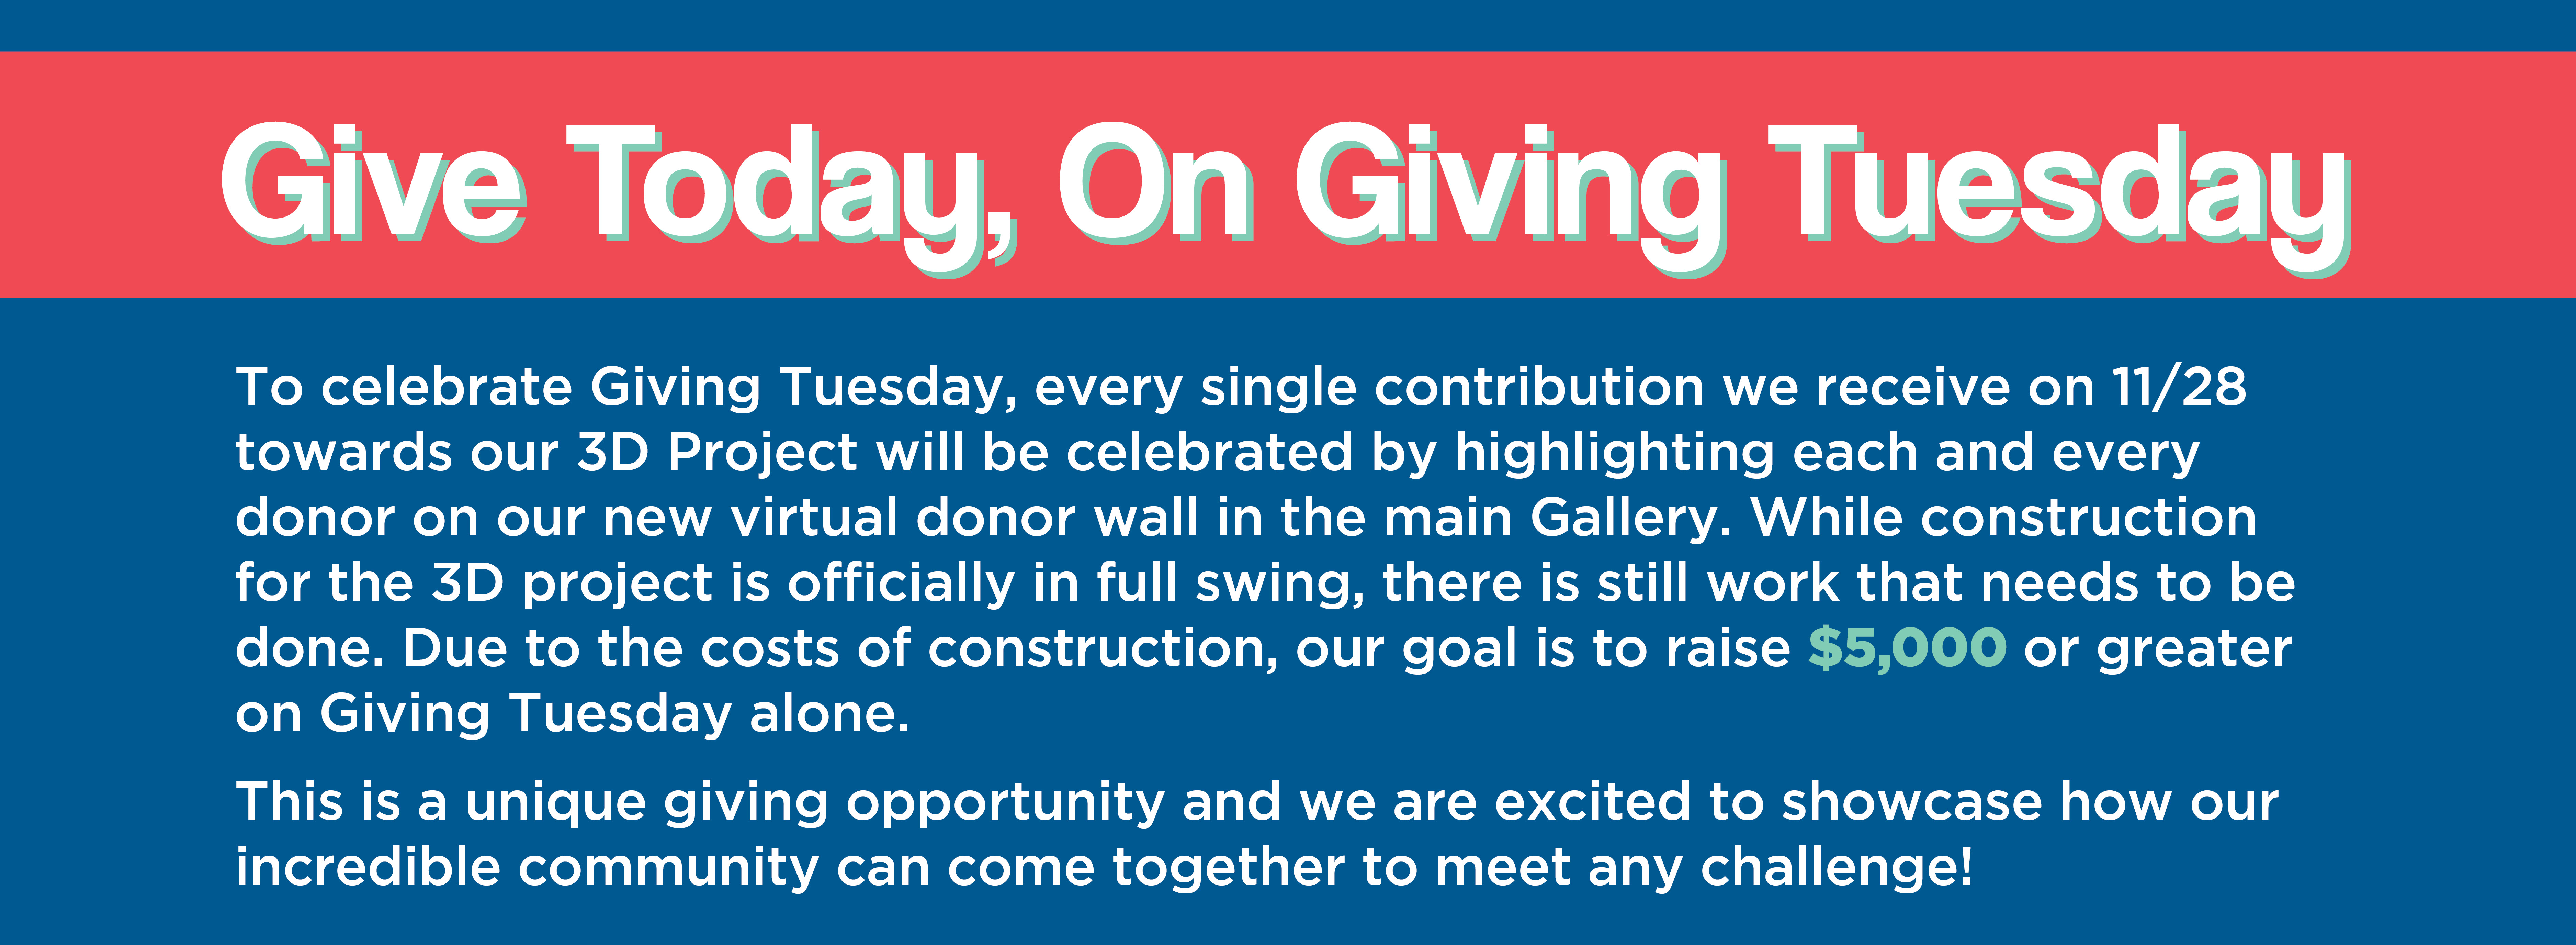 Giving Tuesday Web Banner1